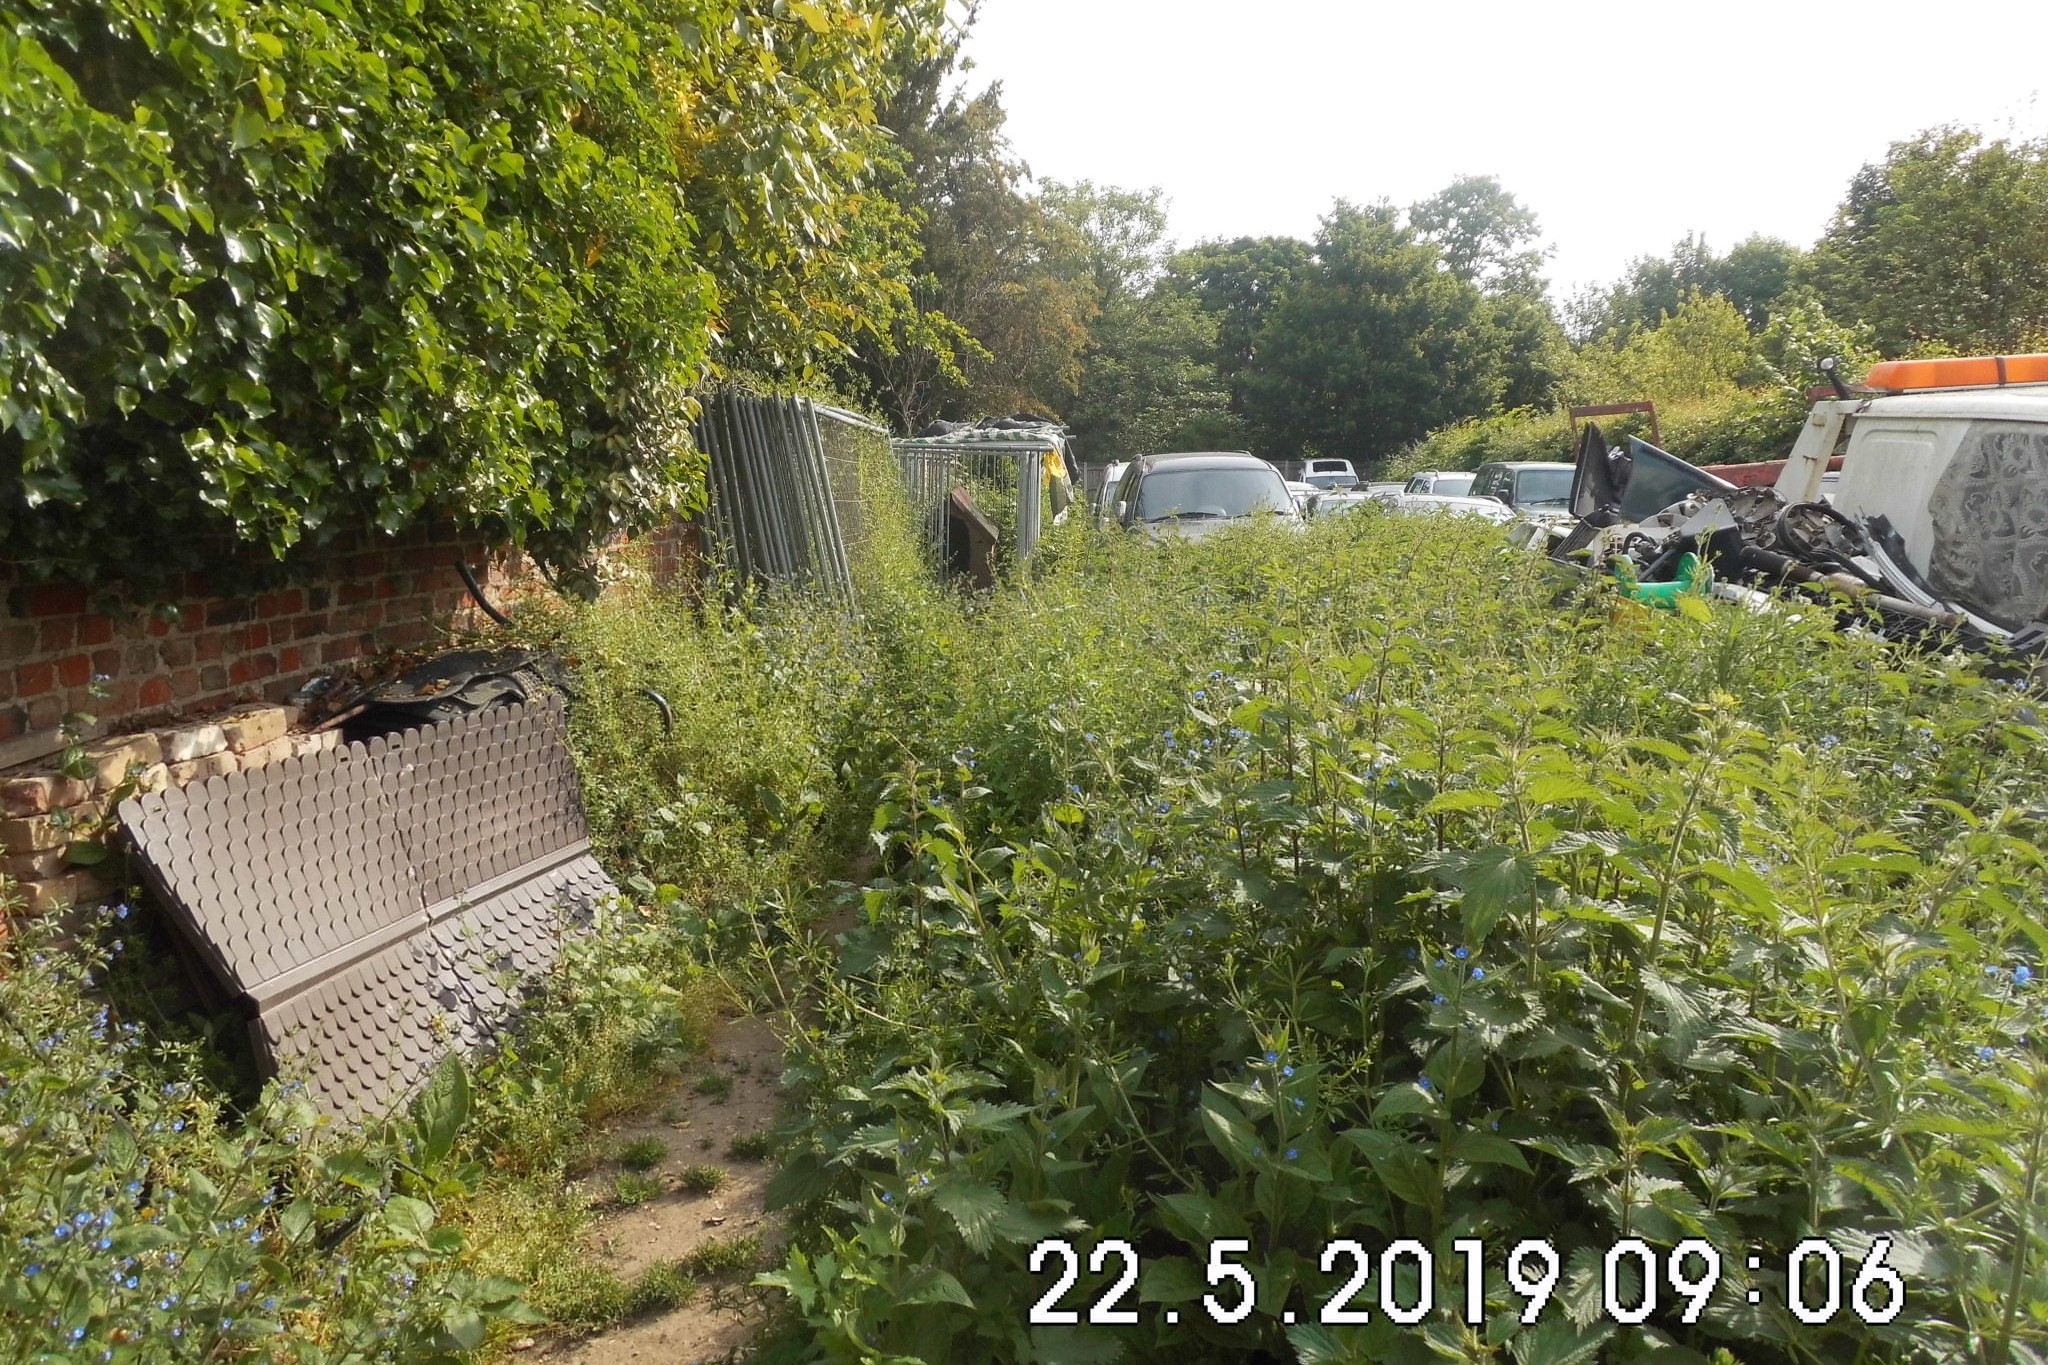 An image of an overgrown garden, with parked vehicles and a makeshift kennel for a dog.